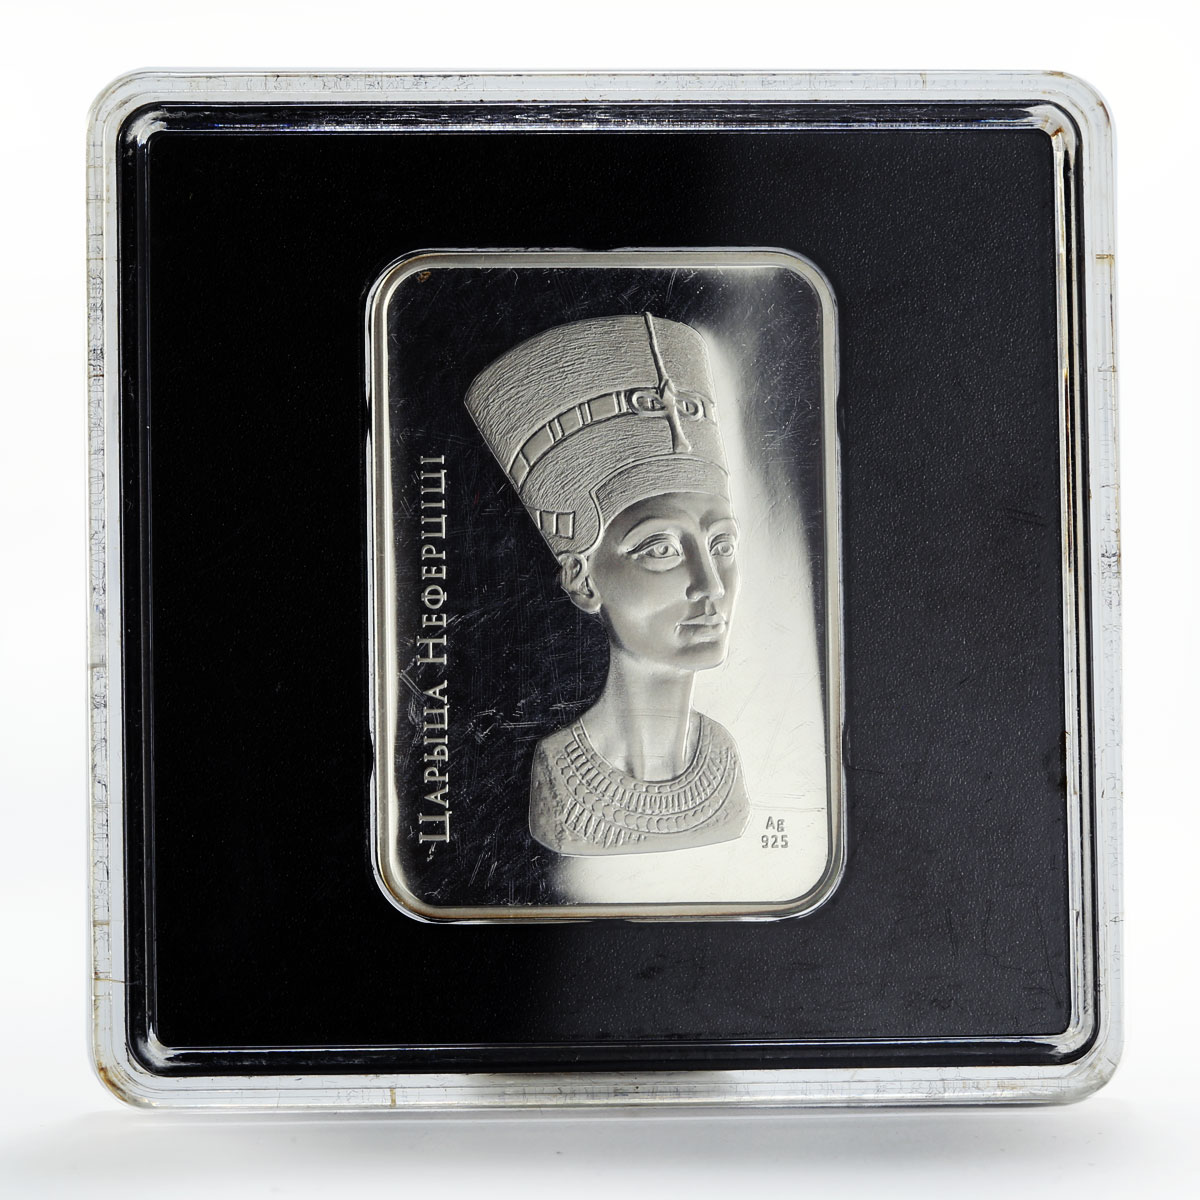 Belarus 20 rubles Nefertiti Egyptian qeen proof silver coin 2010